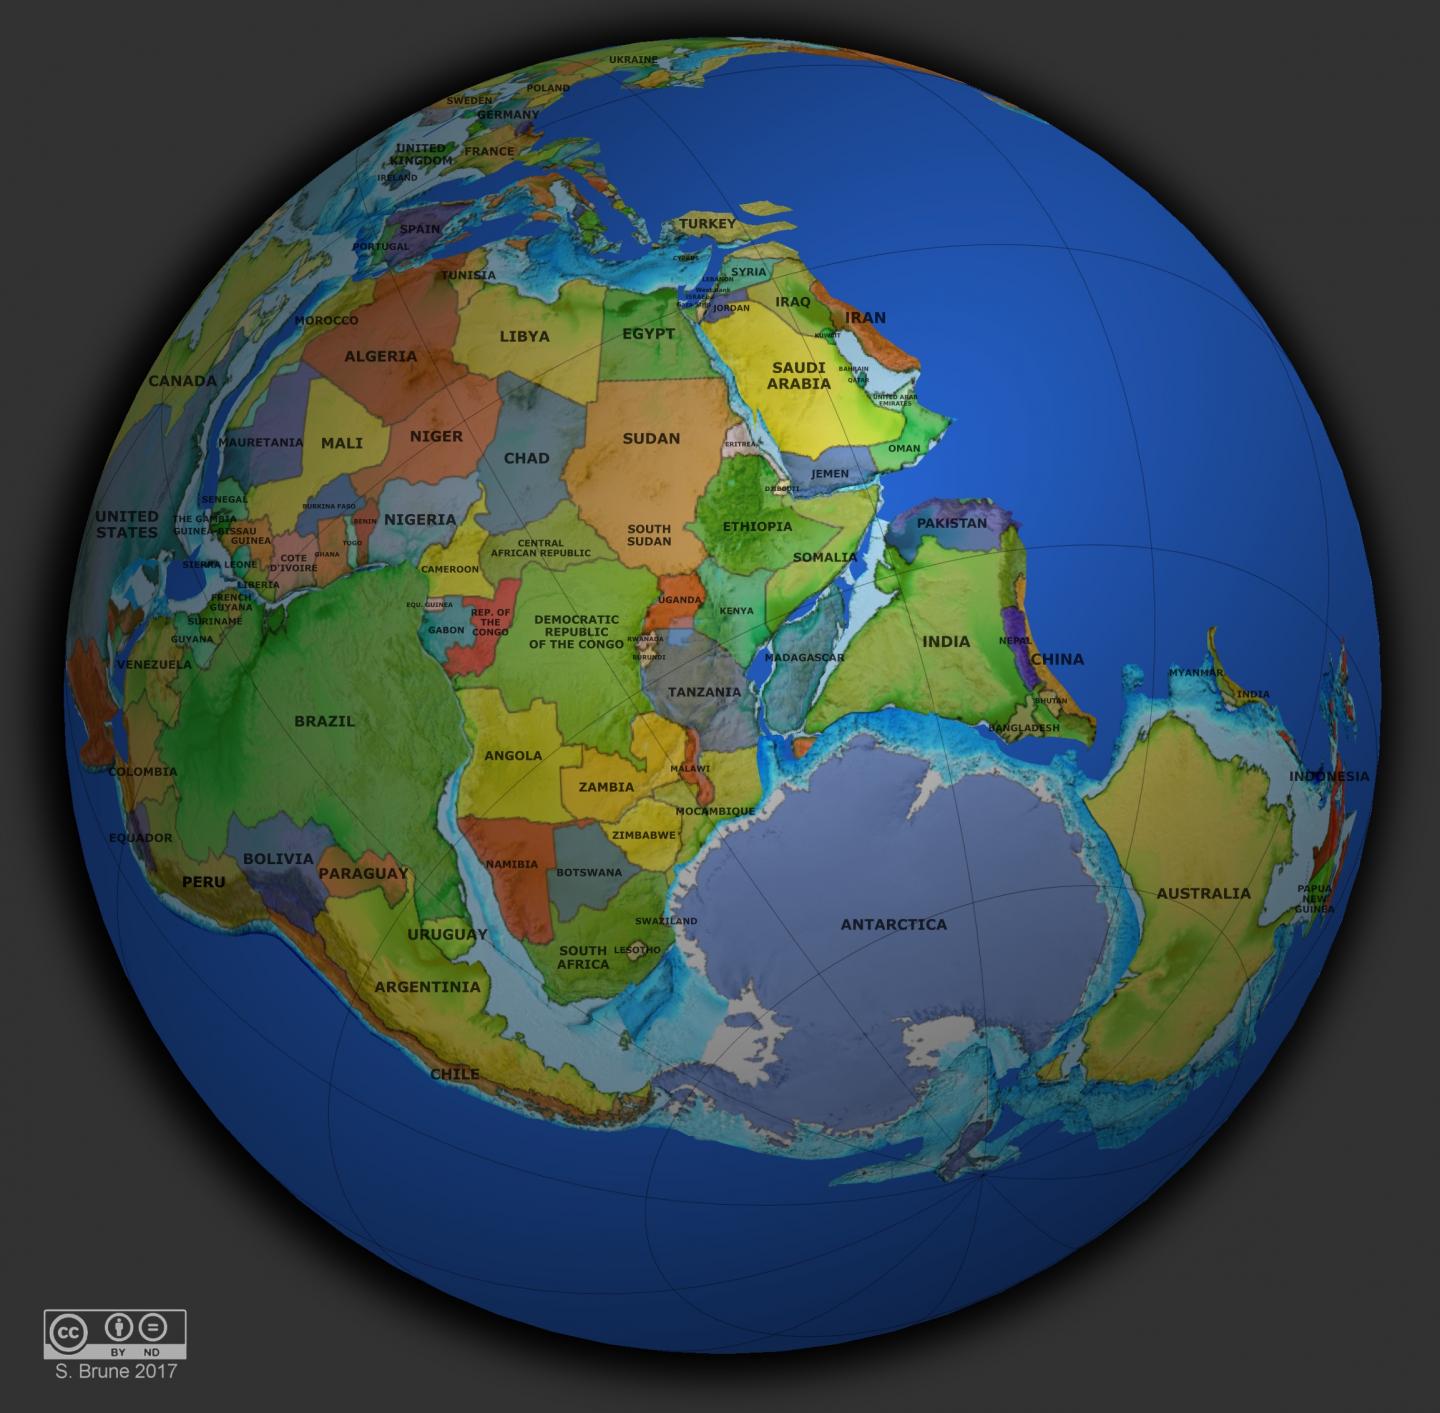 Fragmentation of the Supercontinent Pangea